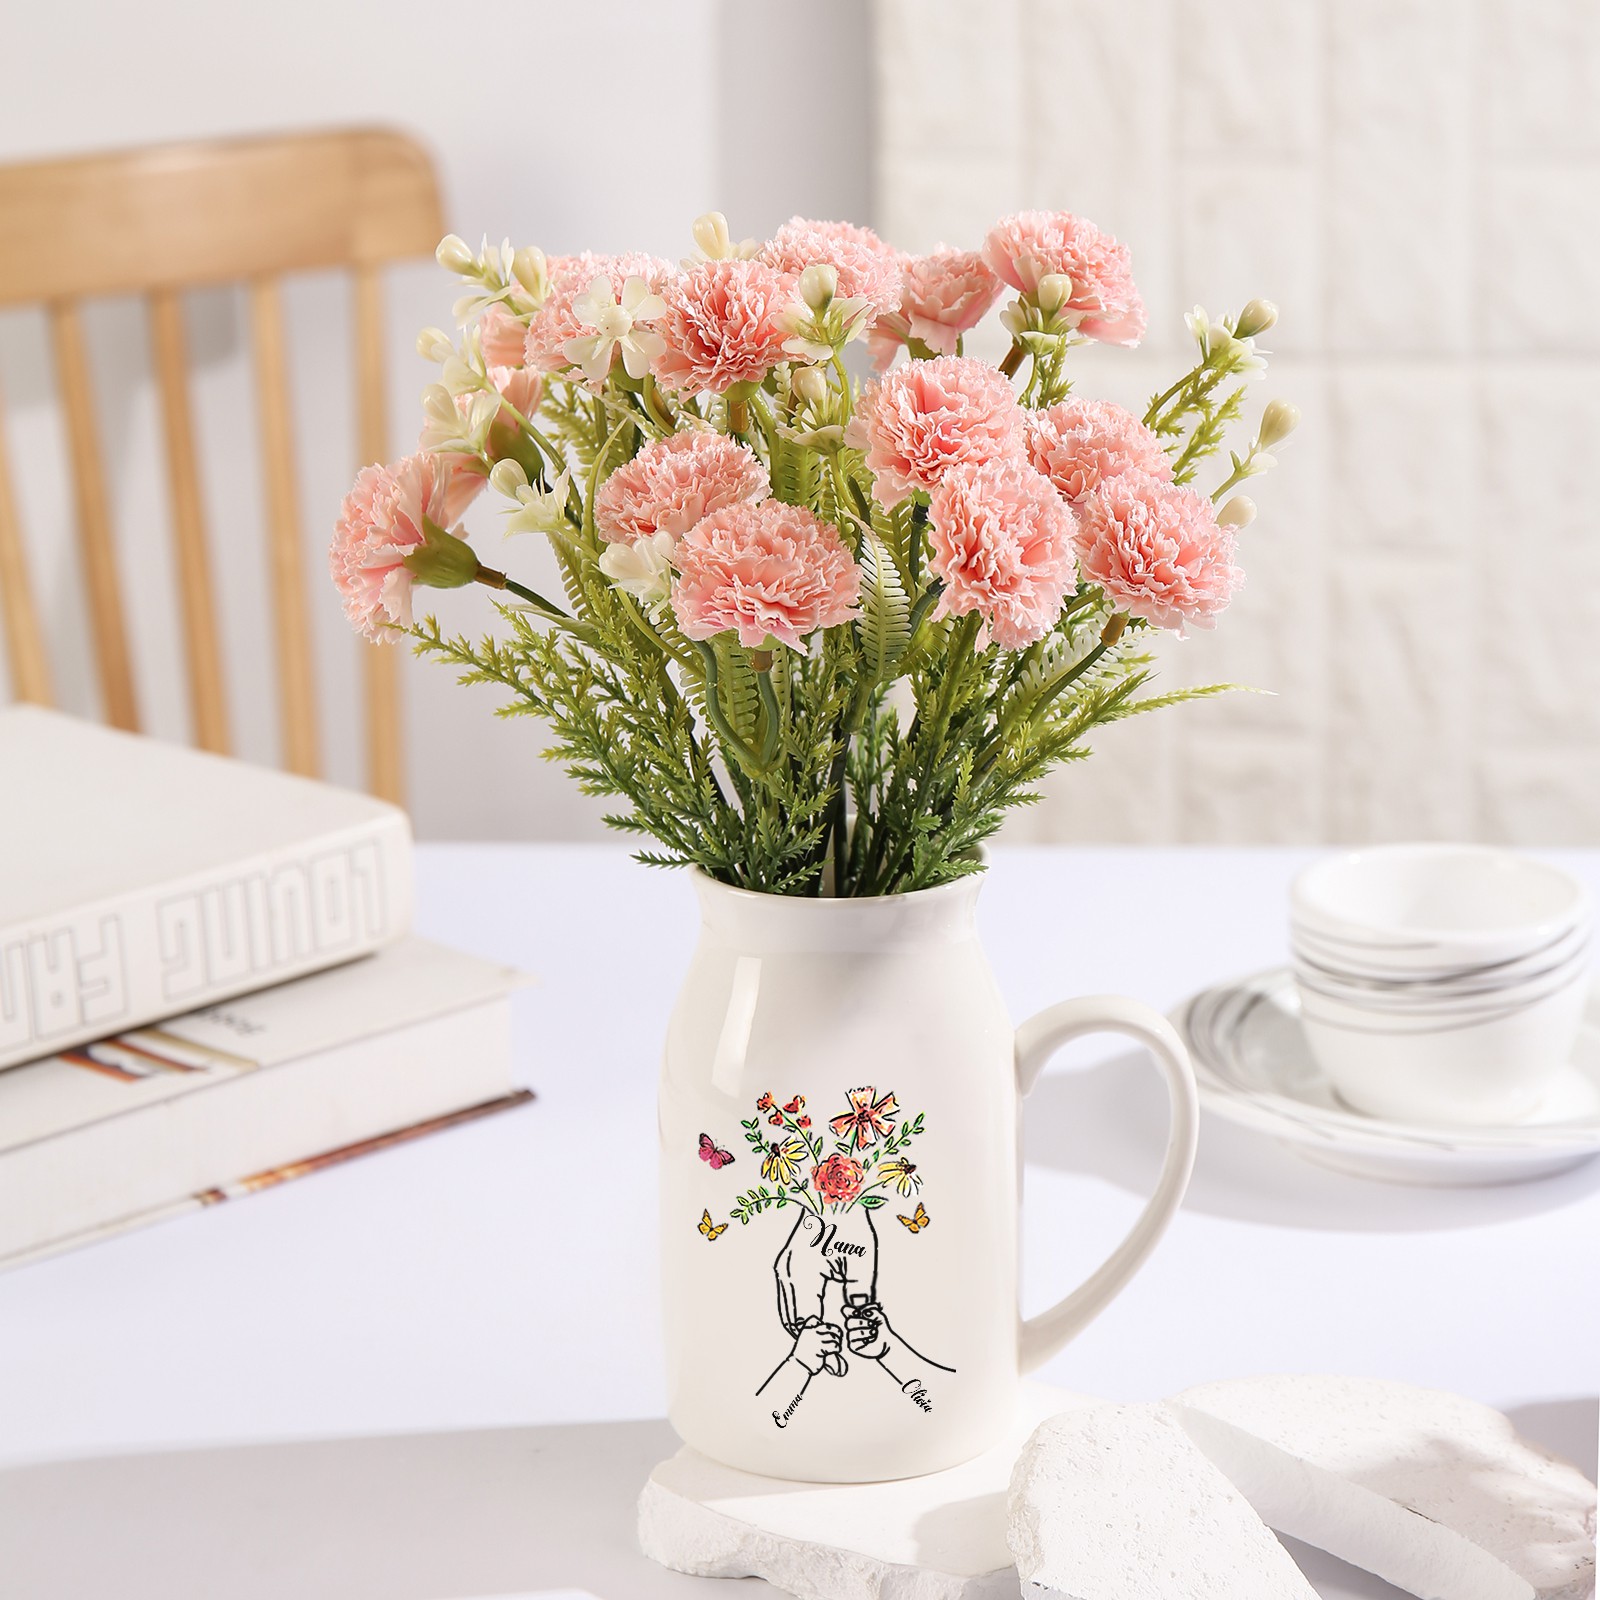 2 Names - Personalized Beautiful Flower Hand Butterfly Style Ceramic Vase with Customizable Names As a Mother's Day Gift For Mom